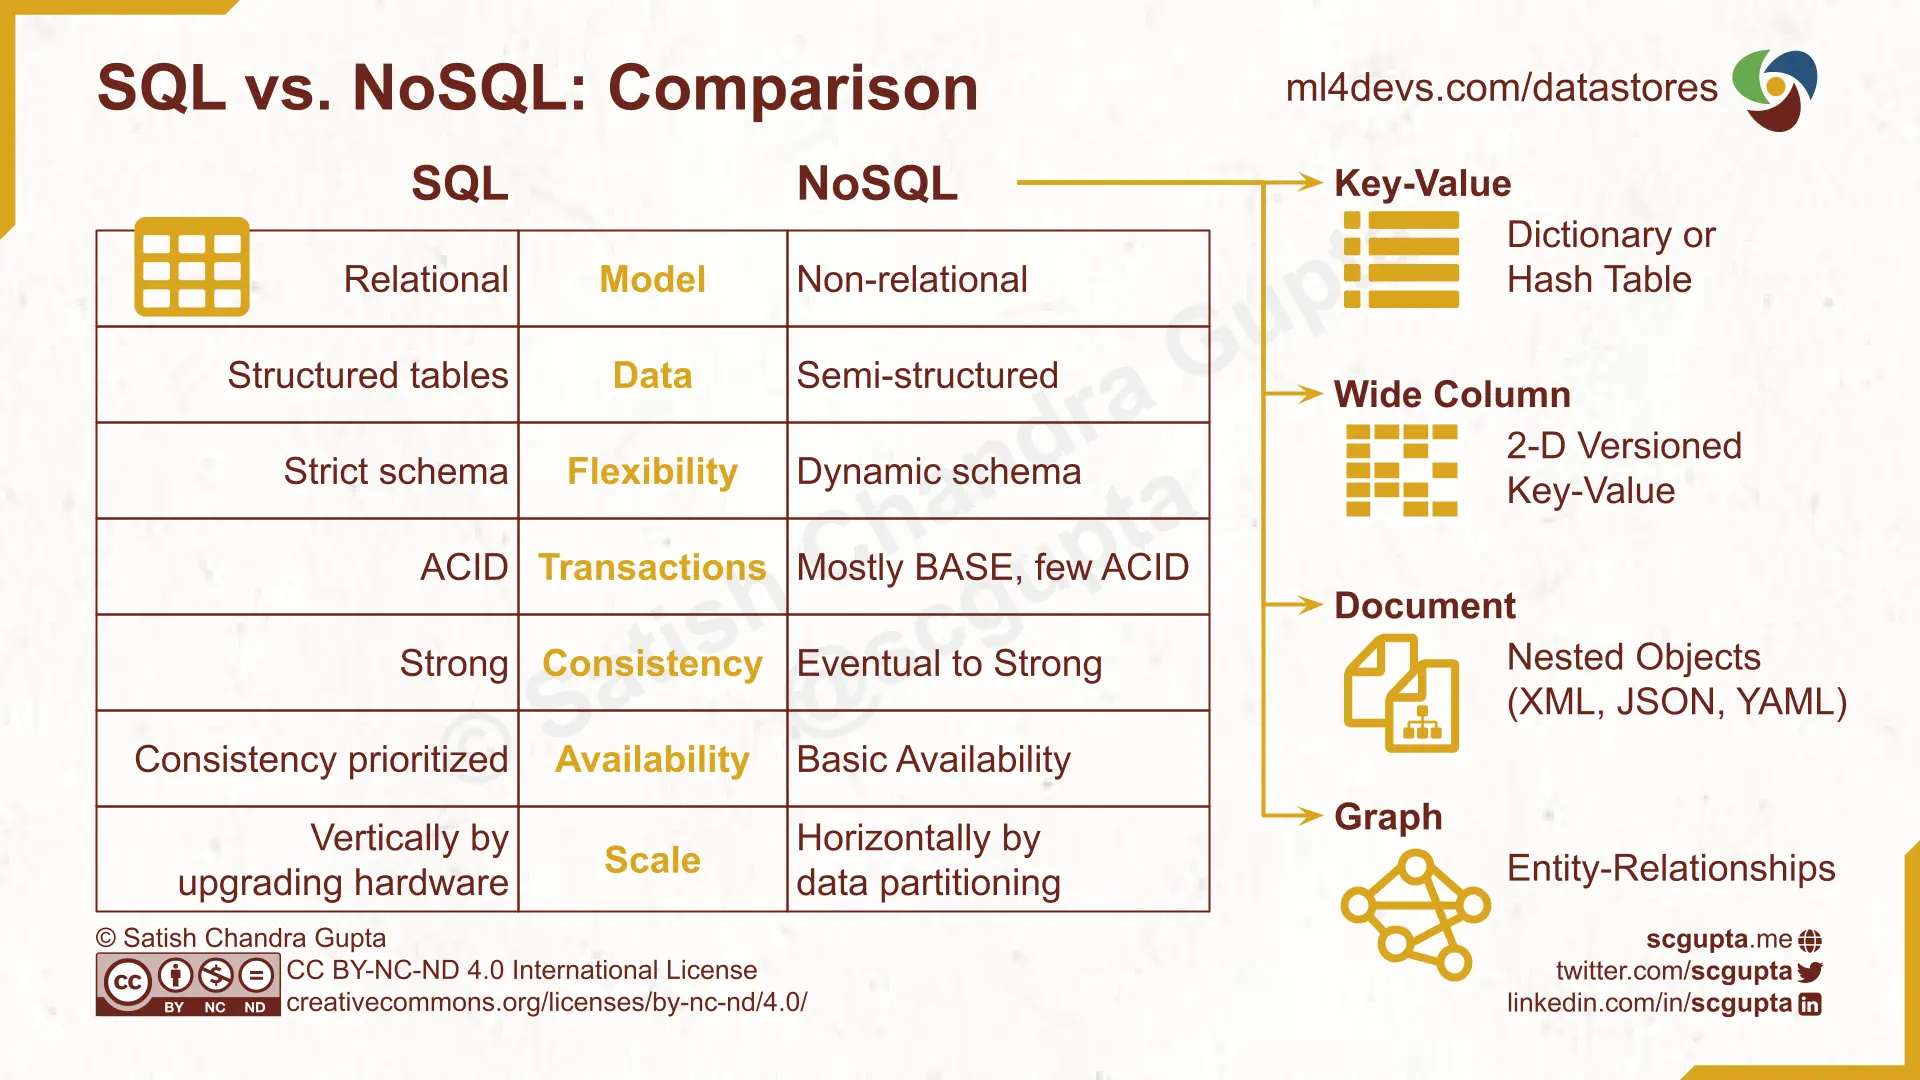 SQL vs. NoSQL: Difference between NoSQL and SQL databases.